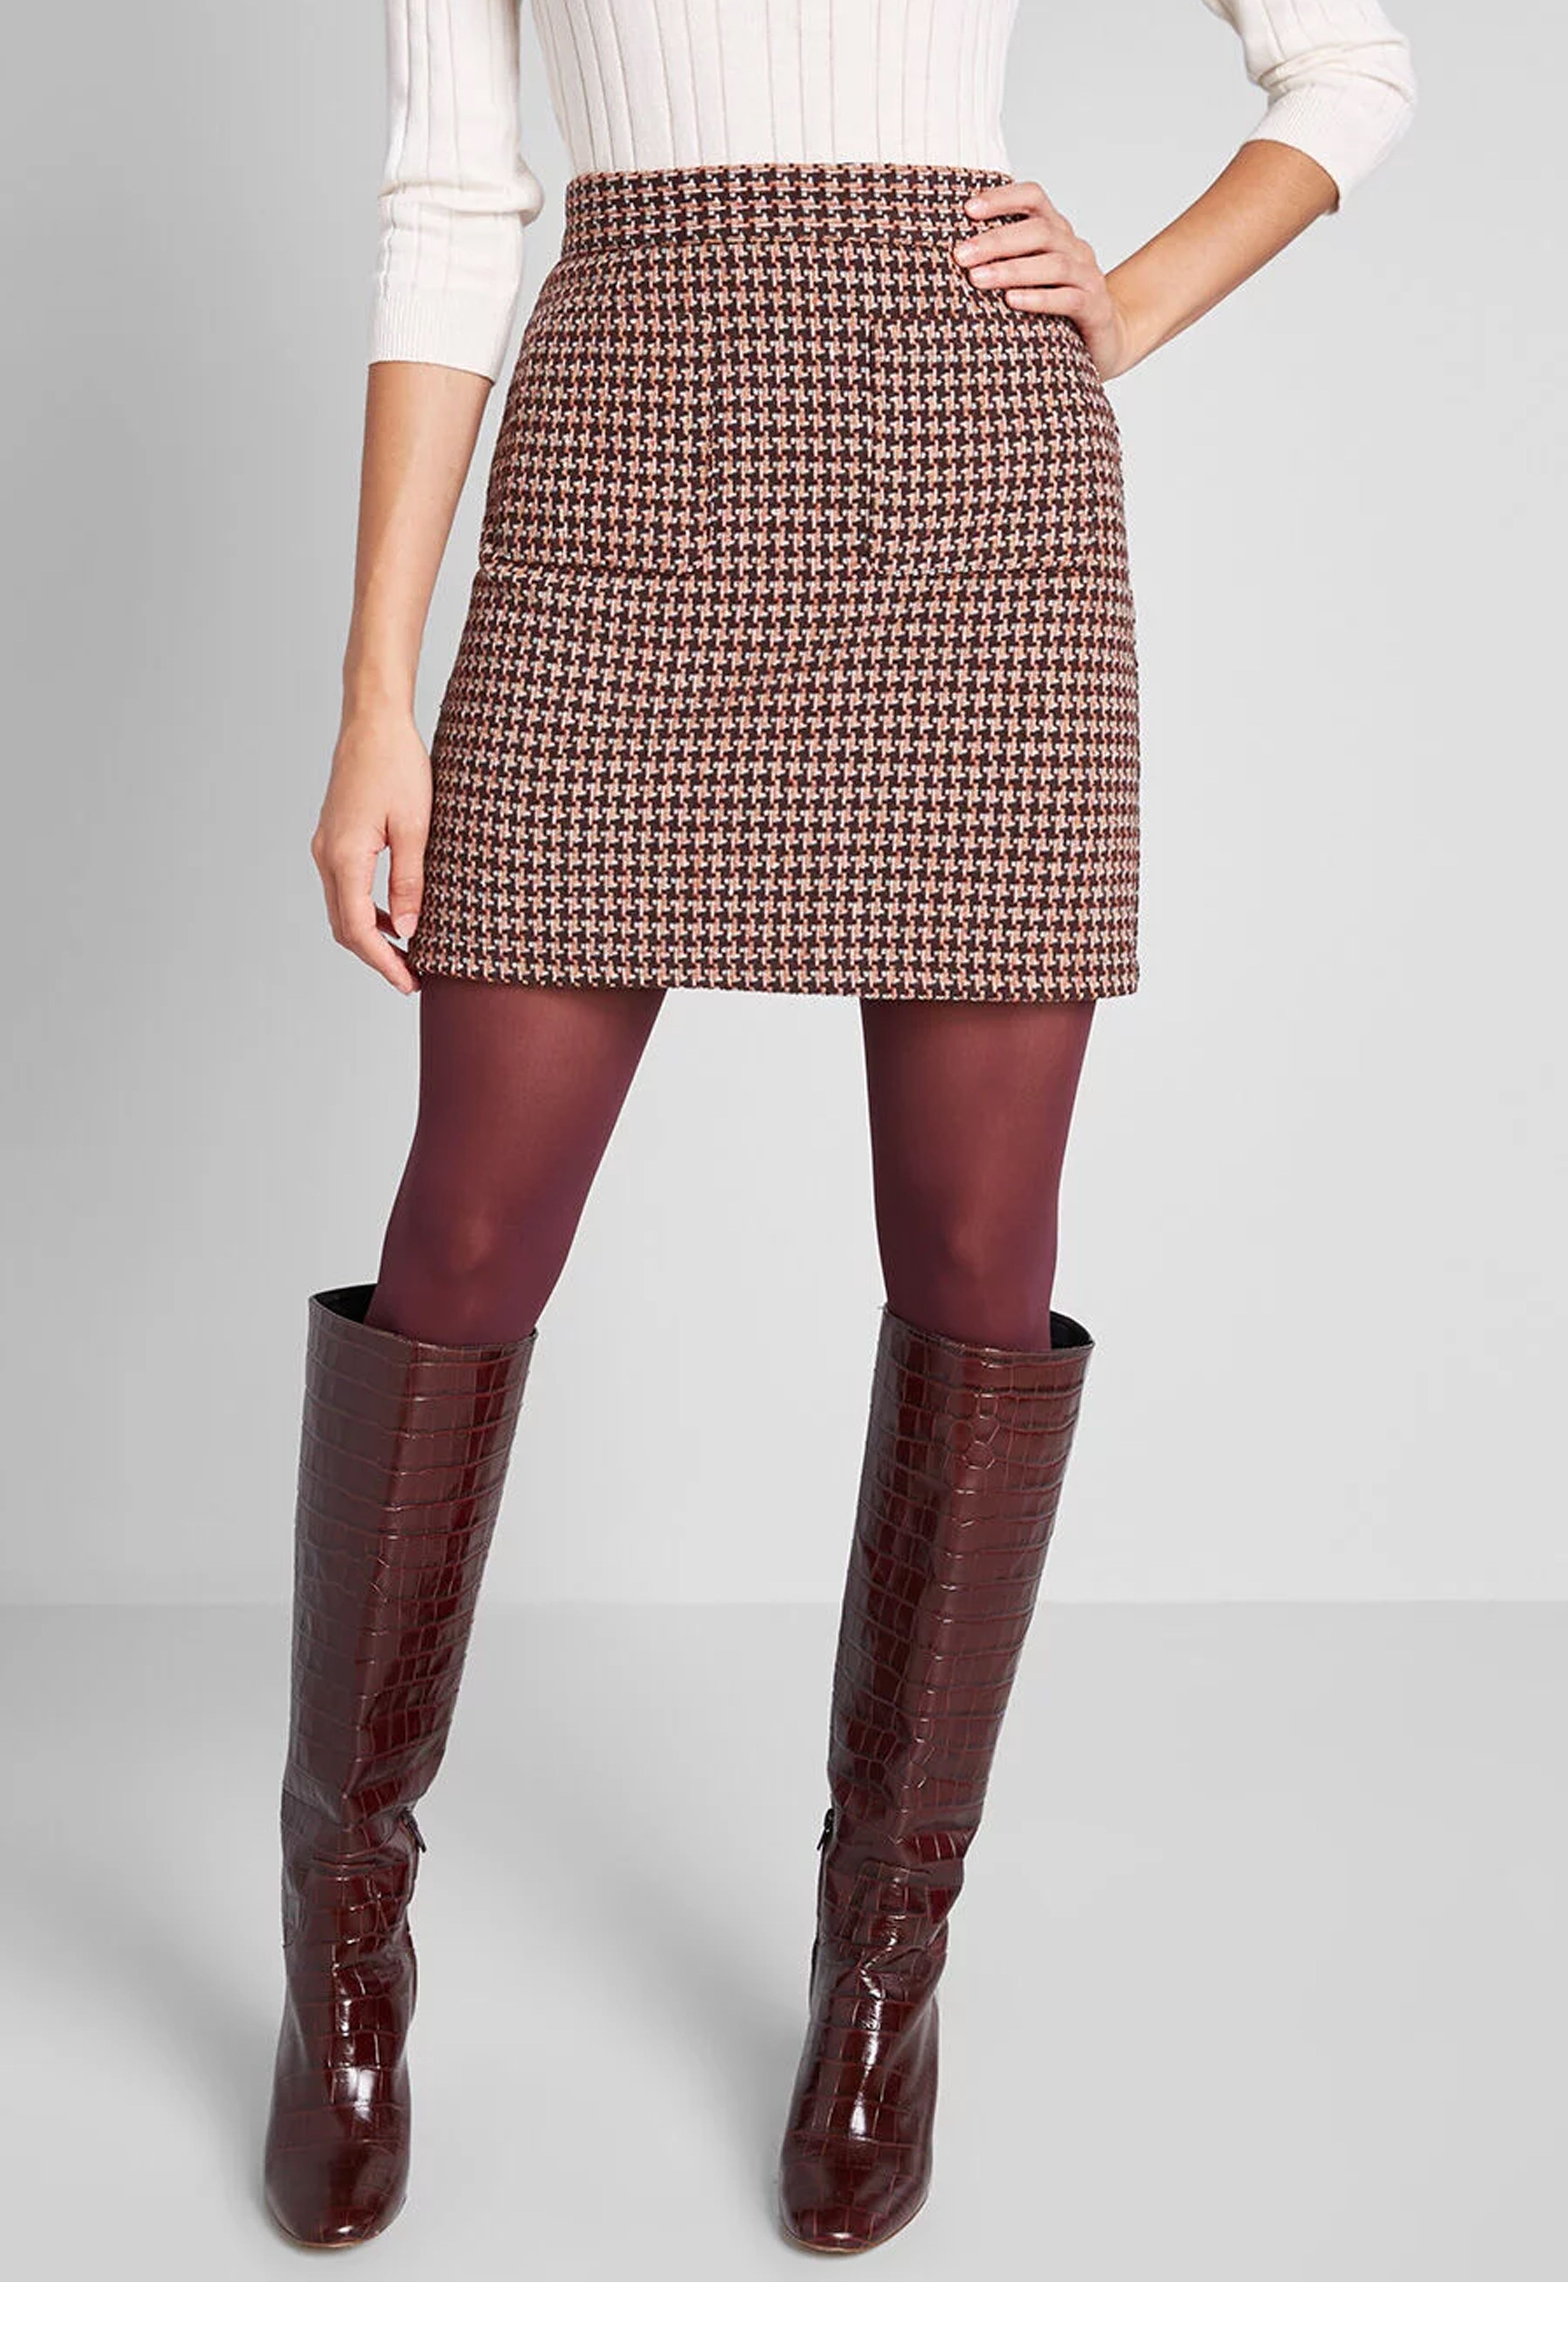 plaid skirt and boots